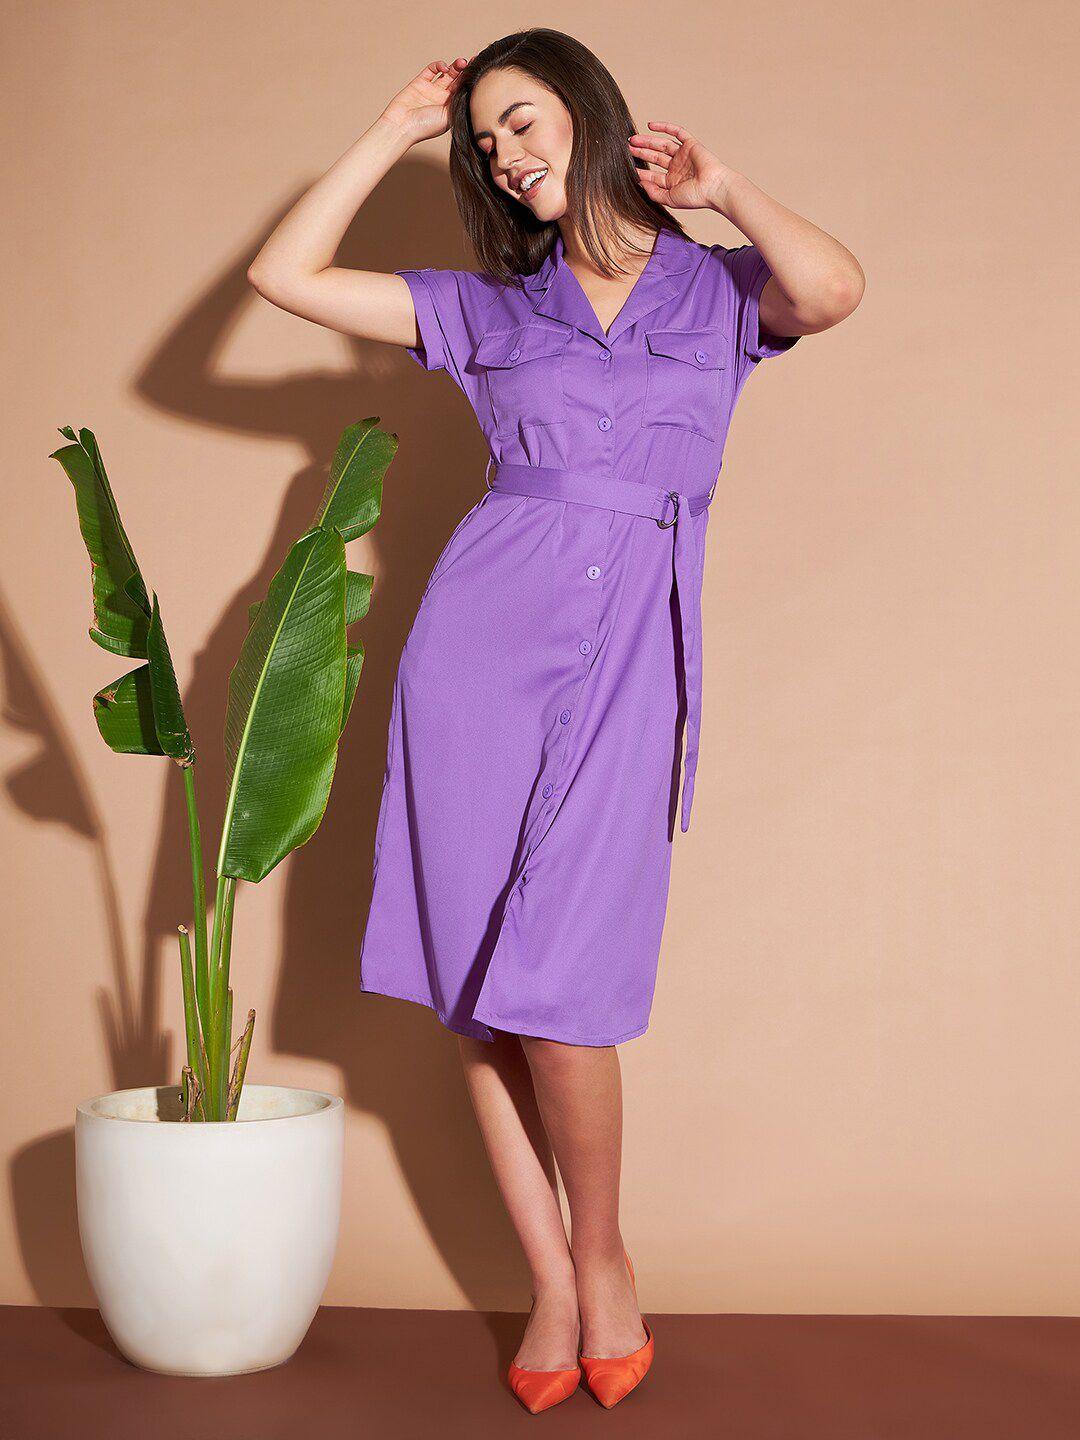 marie claire purple roll-up sleeves shirt midi dress